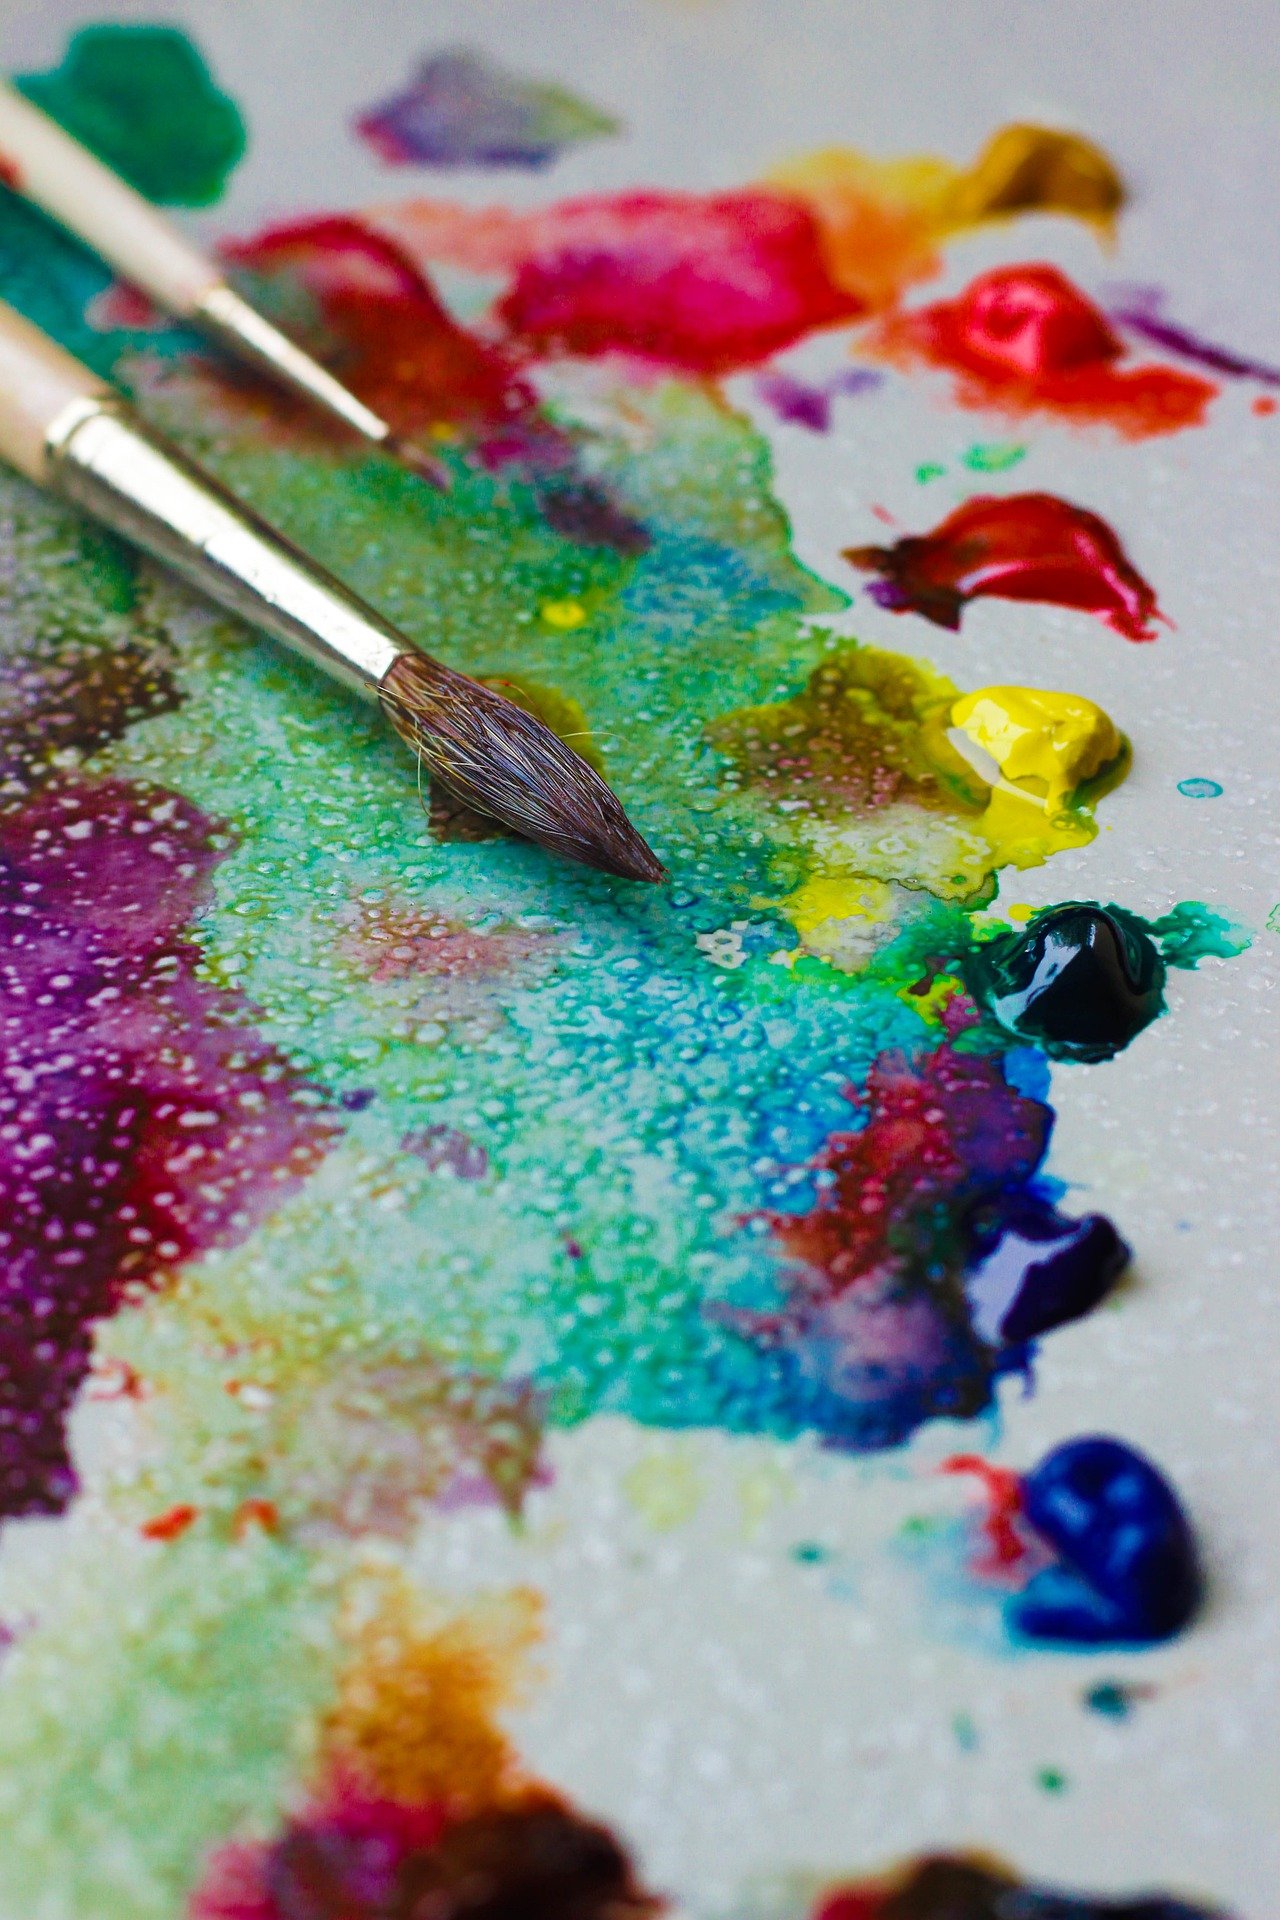 A photo of paintbrushes lying on paper that is dotted with watercolor paint.